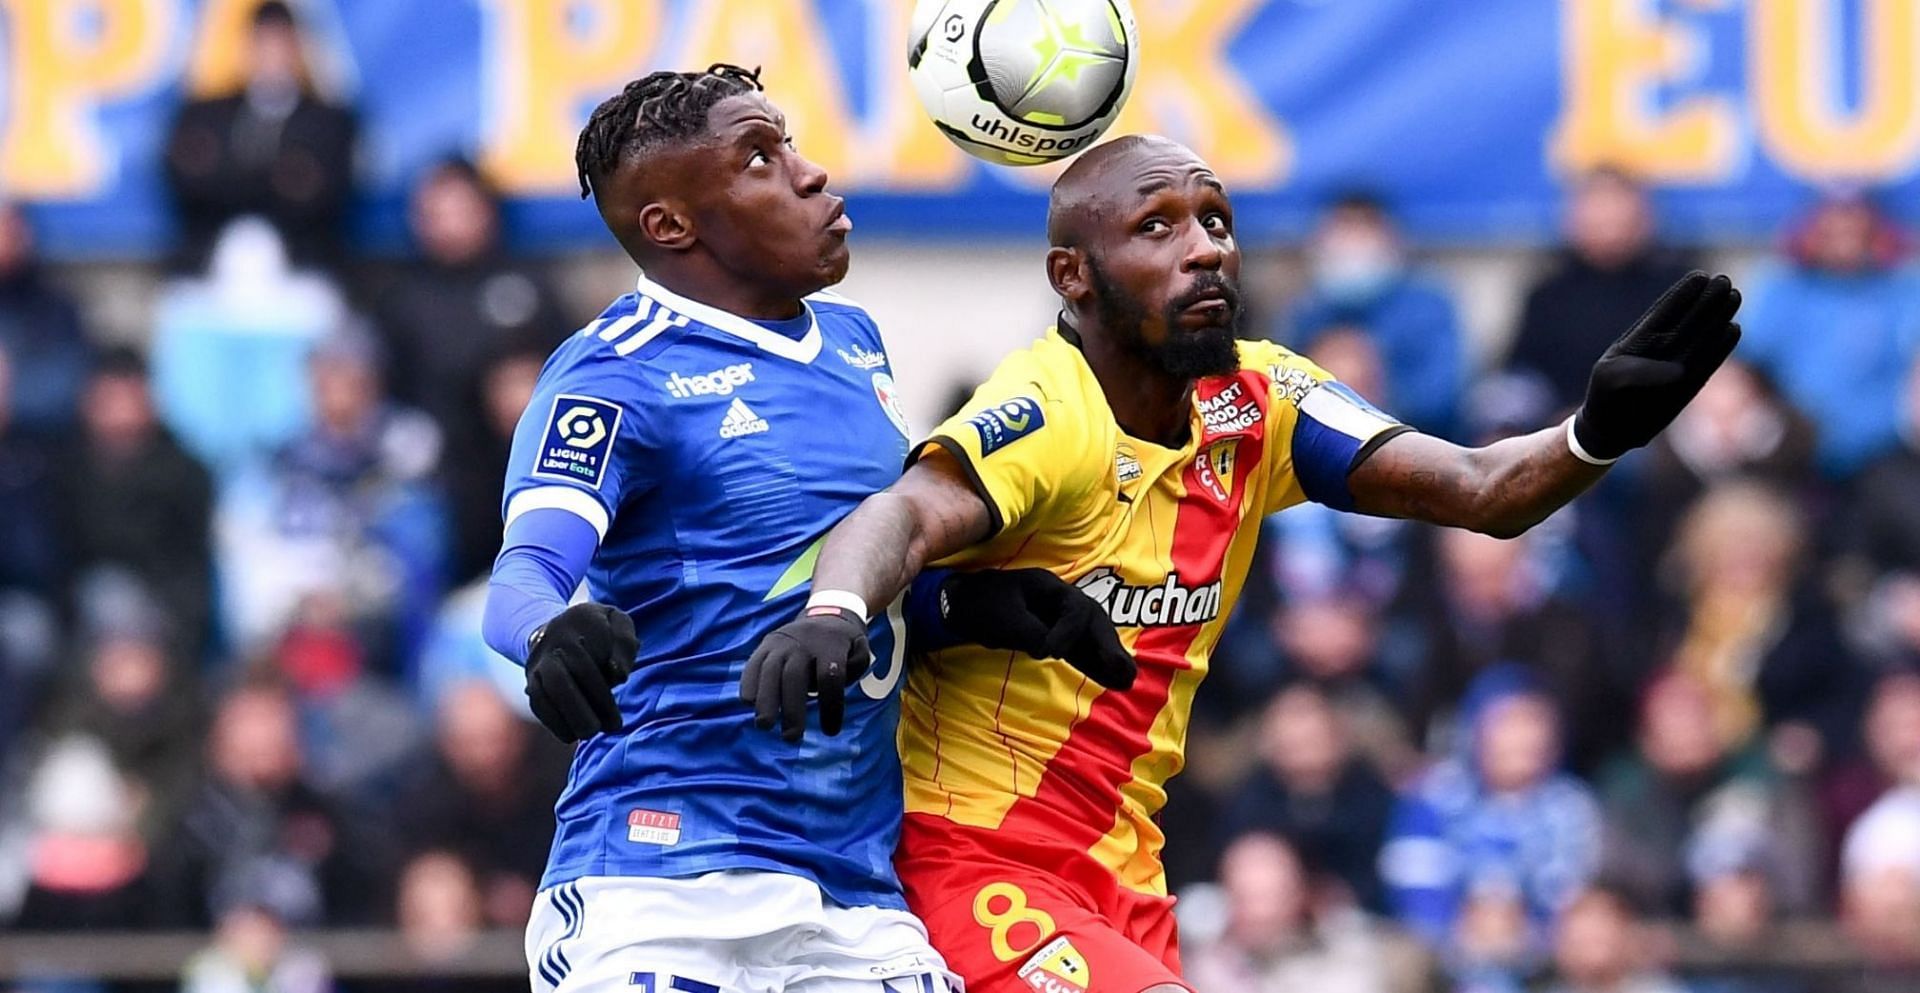 Strasbourg and Lens will square off in Ligue 1 on Wednesday